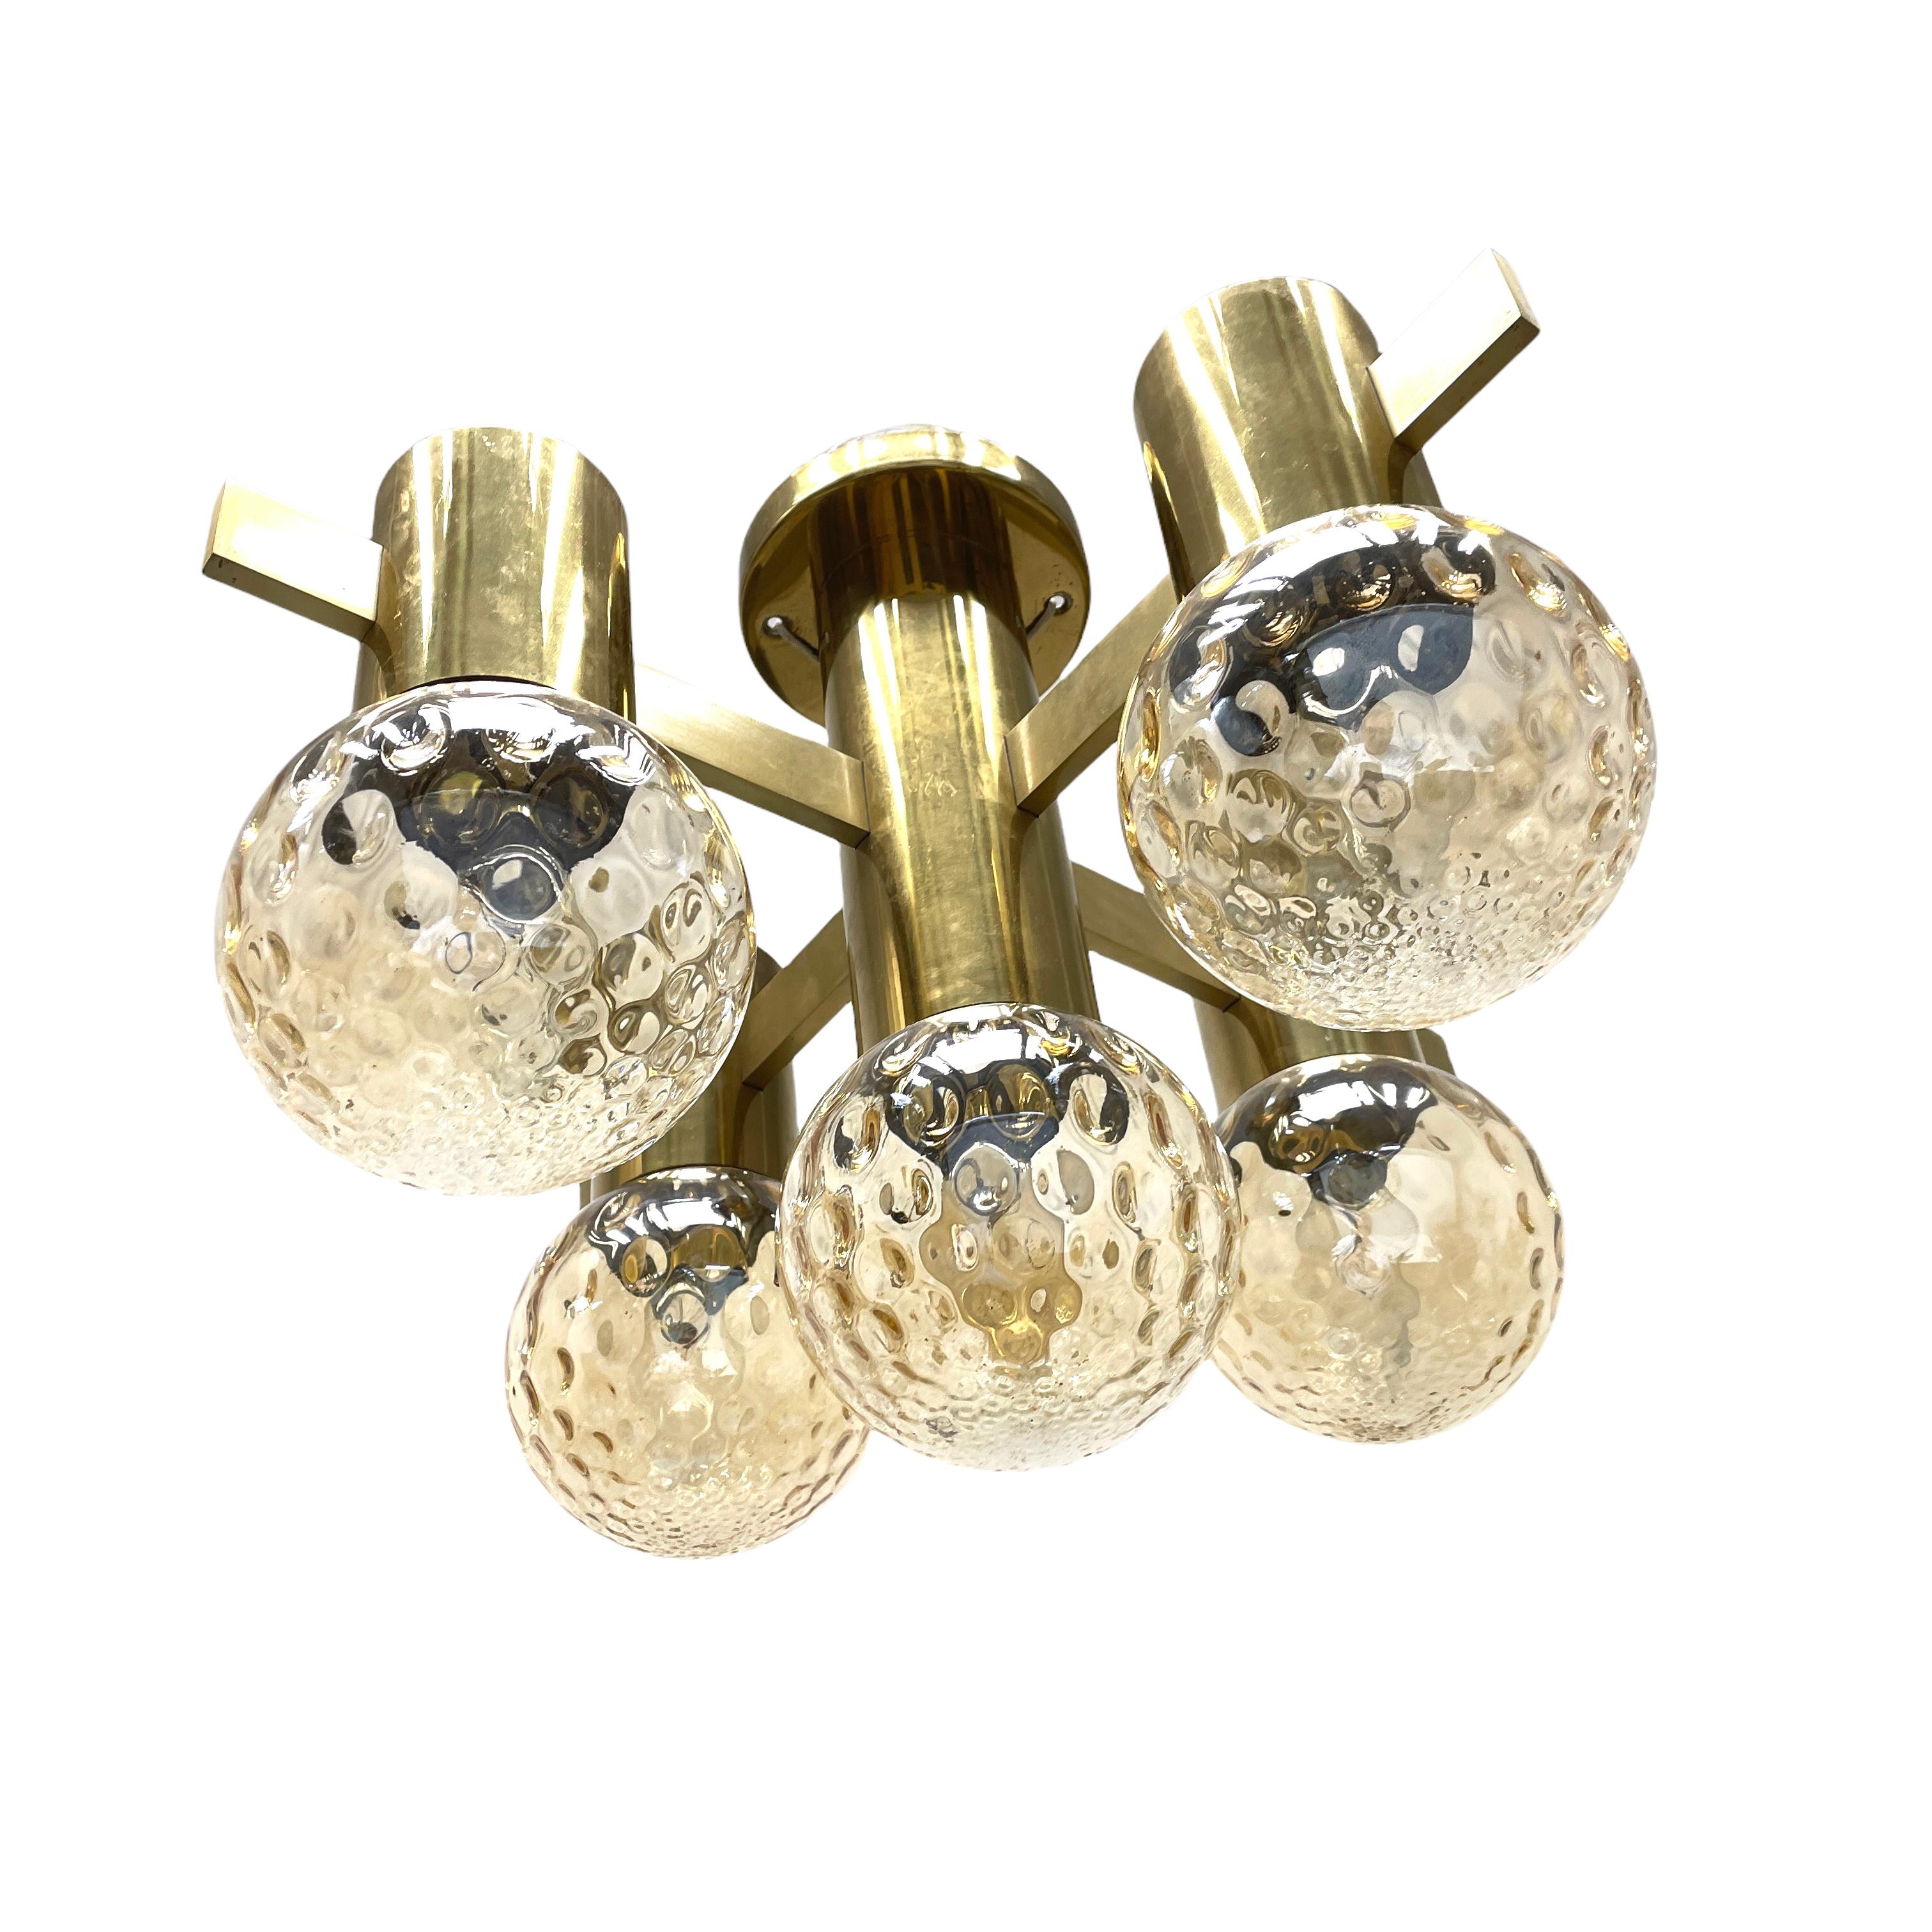 Very decorative and beautiful flush mount made of brass, fitted with five E14 sockets with glass ball shades. Made by Hans Agne Jakobsseon in the 1960s. The fixture requires five European E14 / 110 Volt bulbs, each bulb up to 40 watts. The brass has